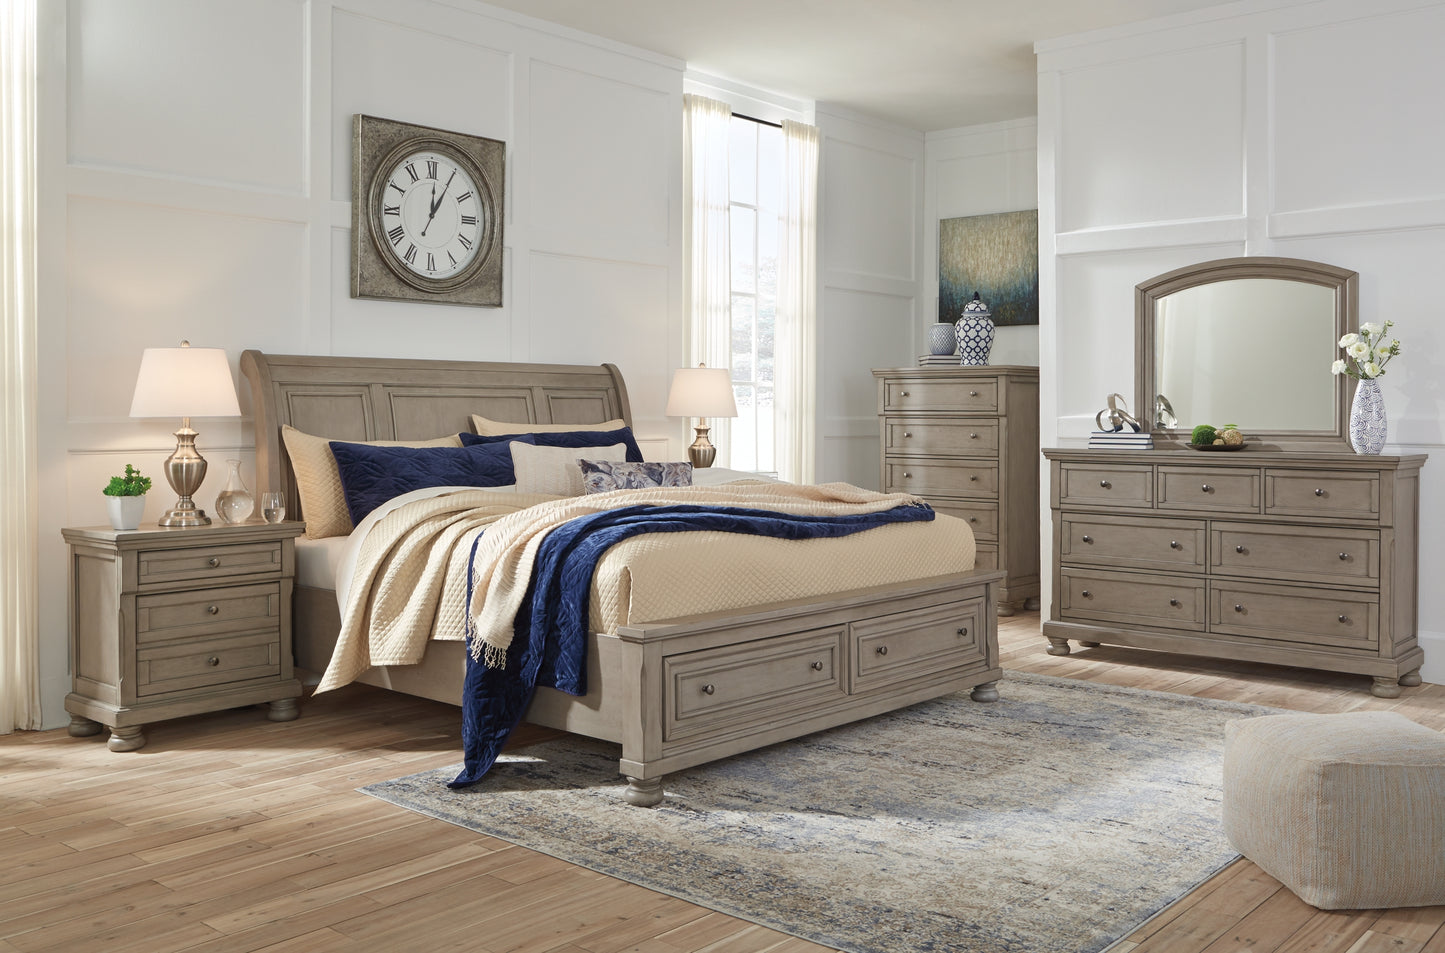 Lettner Queen Sleigh Bed with 2 Storage Drawers with Mirrored Dresser, Chest and Nightstand Wilson Furniture (OH)  in Bridgeport, Ohio. Serving Bridgeport, Yorkville, Bellaire, & Avondale